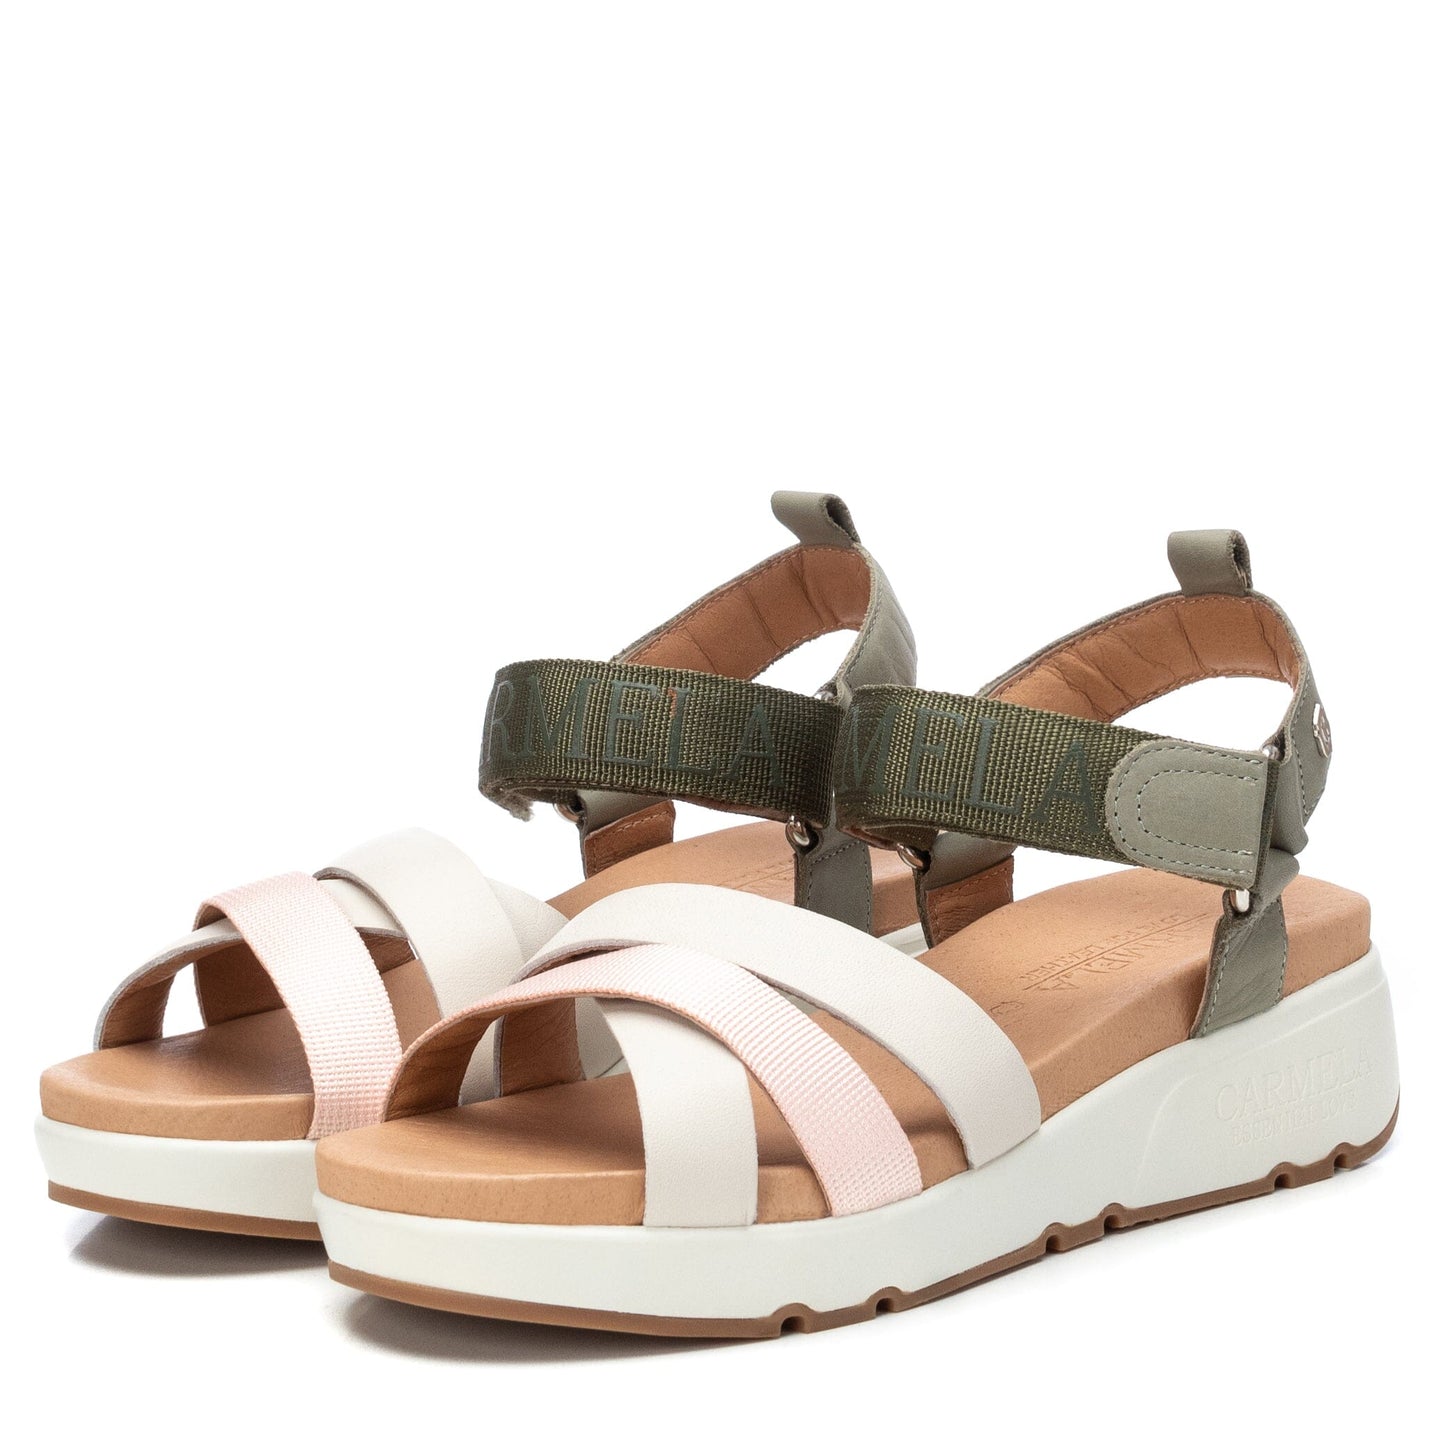 68468 Spanish leather sandals in sport deluxe style in Khaki, white sandals Sam Star Shoes Khaki/White 39 (6) 